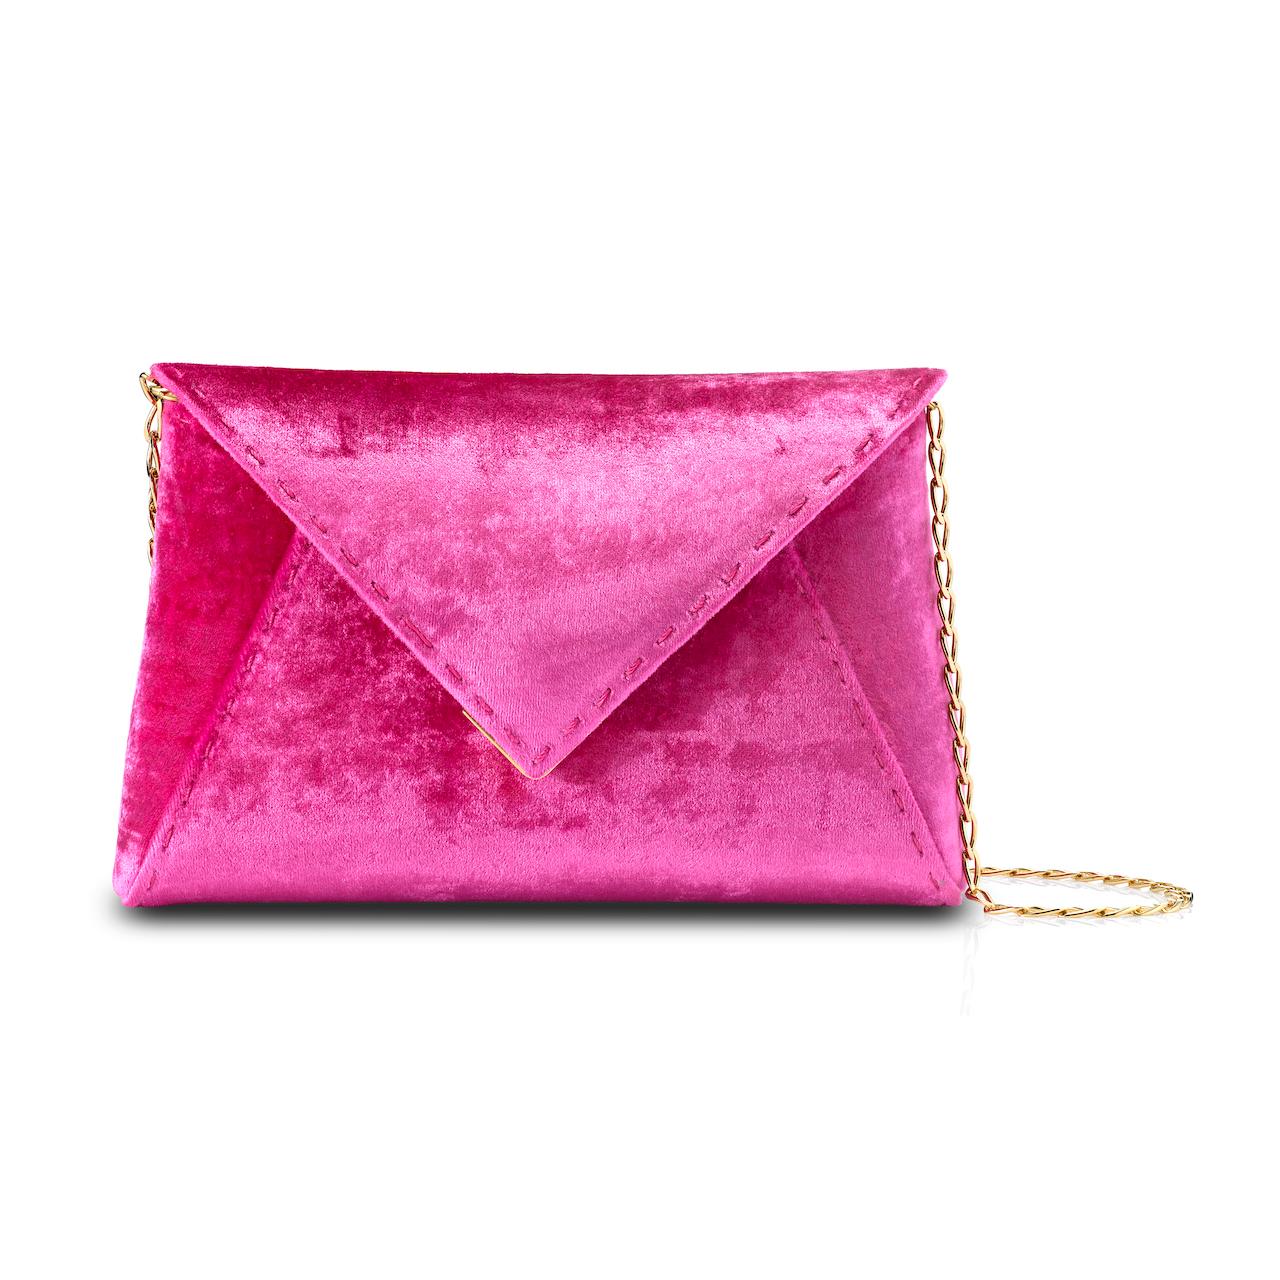 The Lee Pouchet Small Clutch is featured in our Fuchsia crushed velvet with gold hardware. The envelope-shaped clutch is designed with a triangular front flap and a magnetic snap closure. The exterior detailing is entirely hand-stitched. The Lee